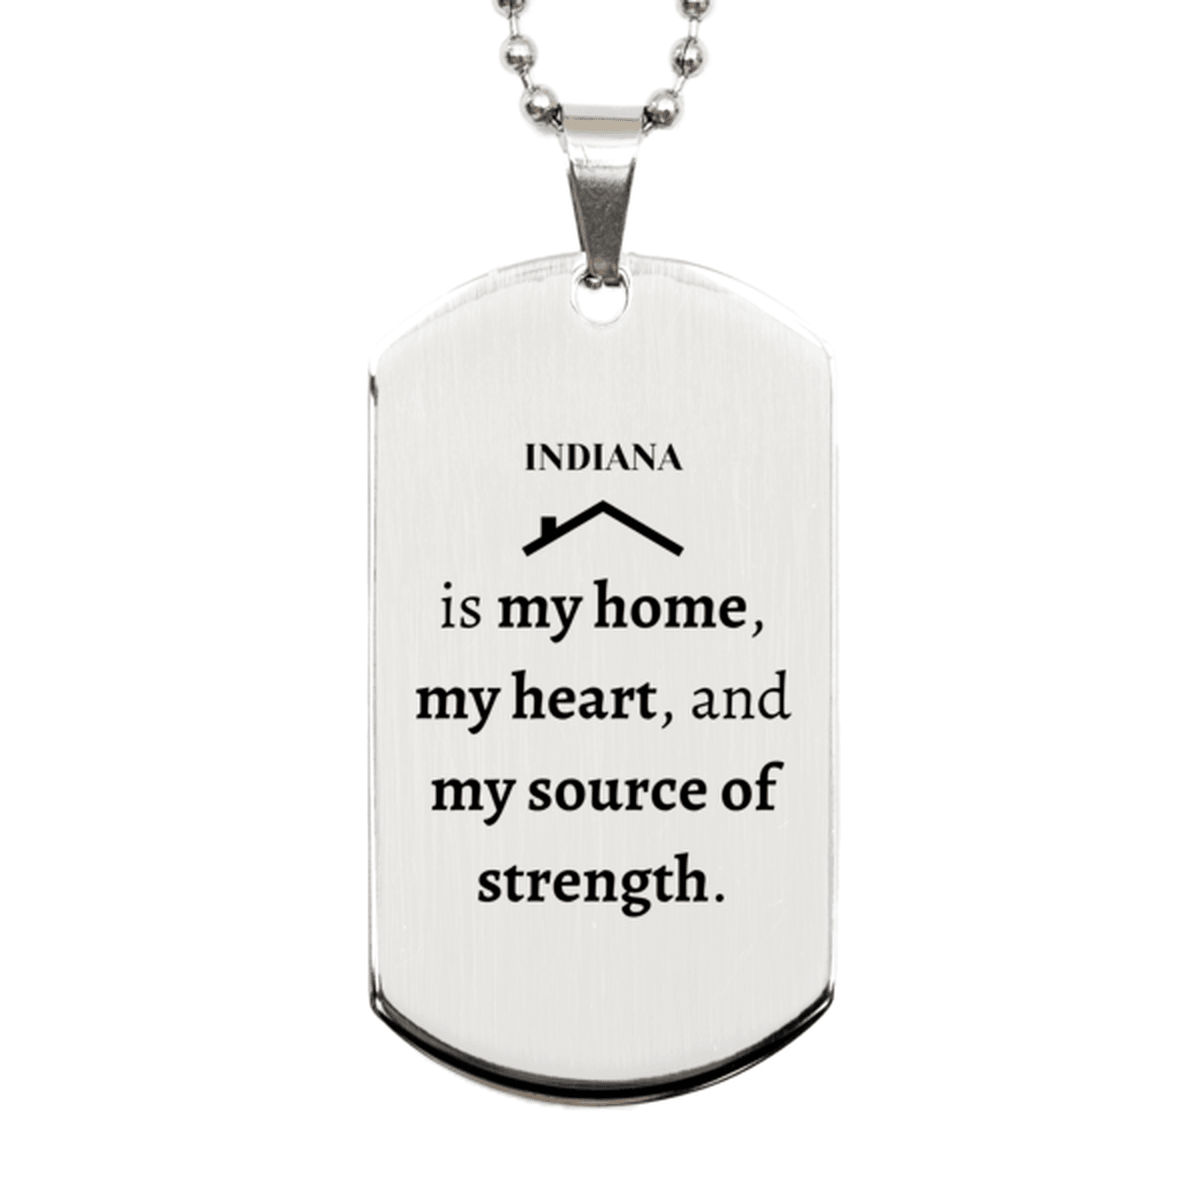 Indiana is my home Gifts, Lovely Indiana Birthday Christmas Silver Dog Tag For People from Indiana, Men, Women, Friends - Mallard Moon Gift Shop